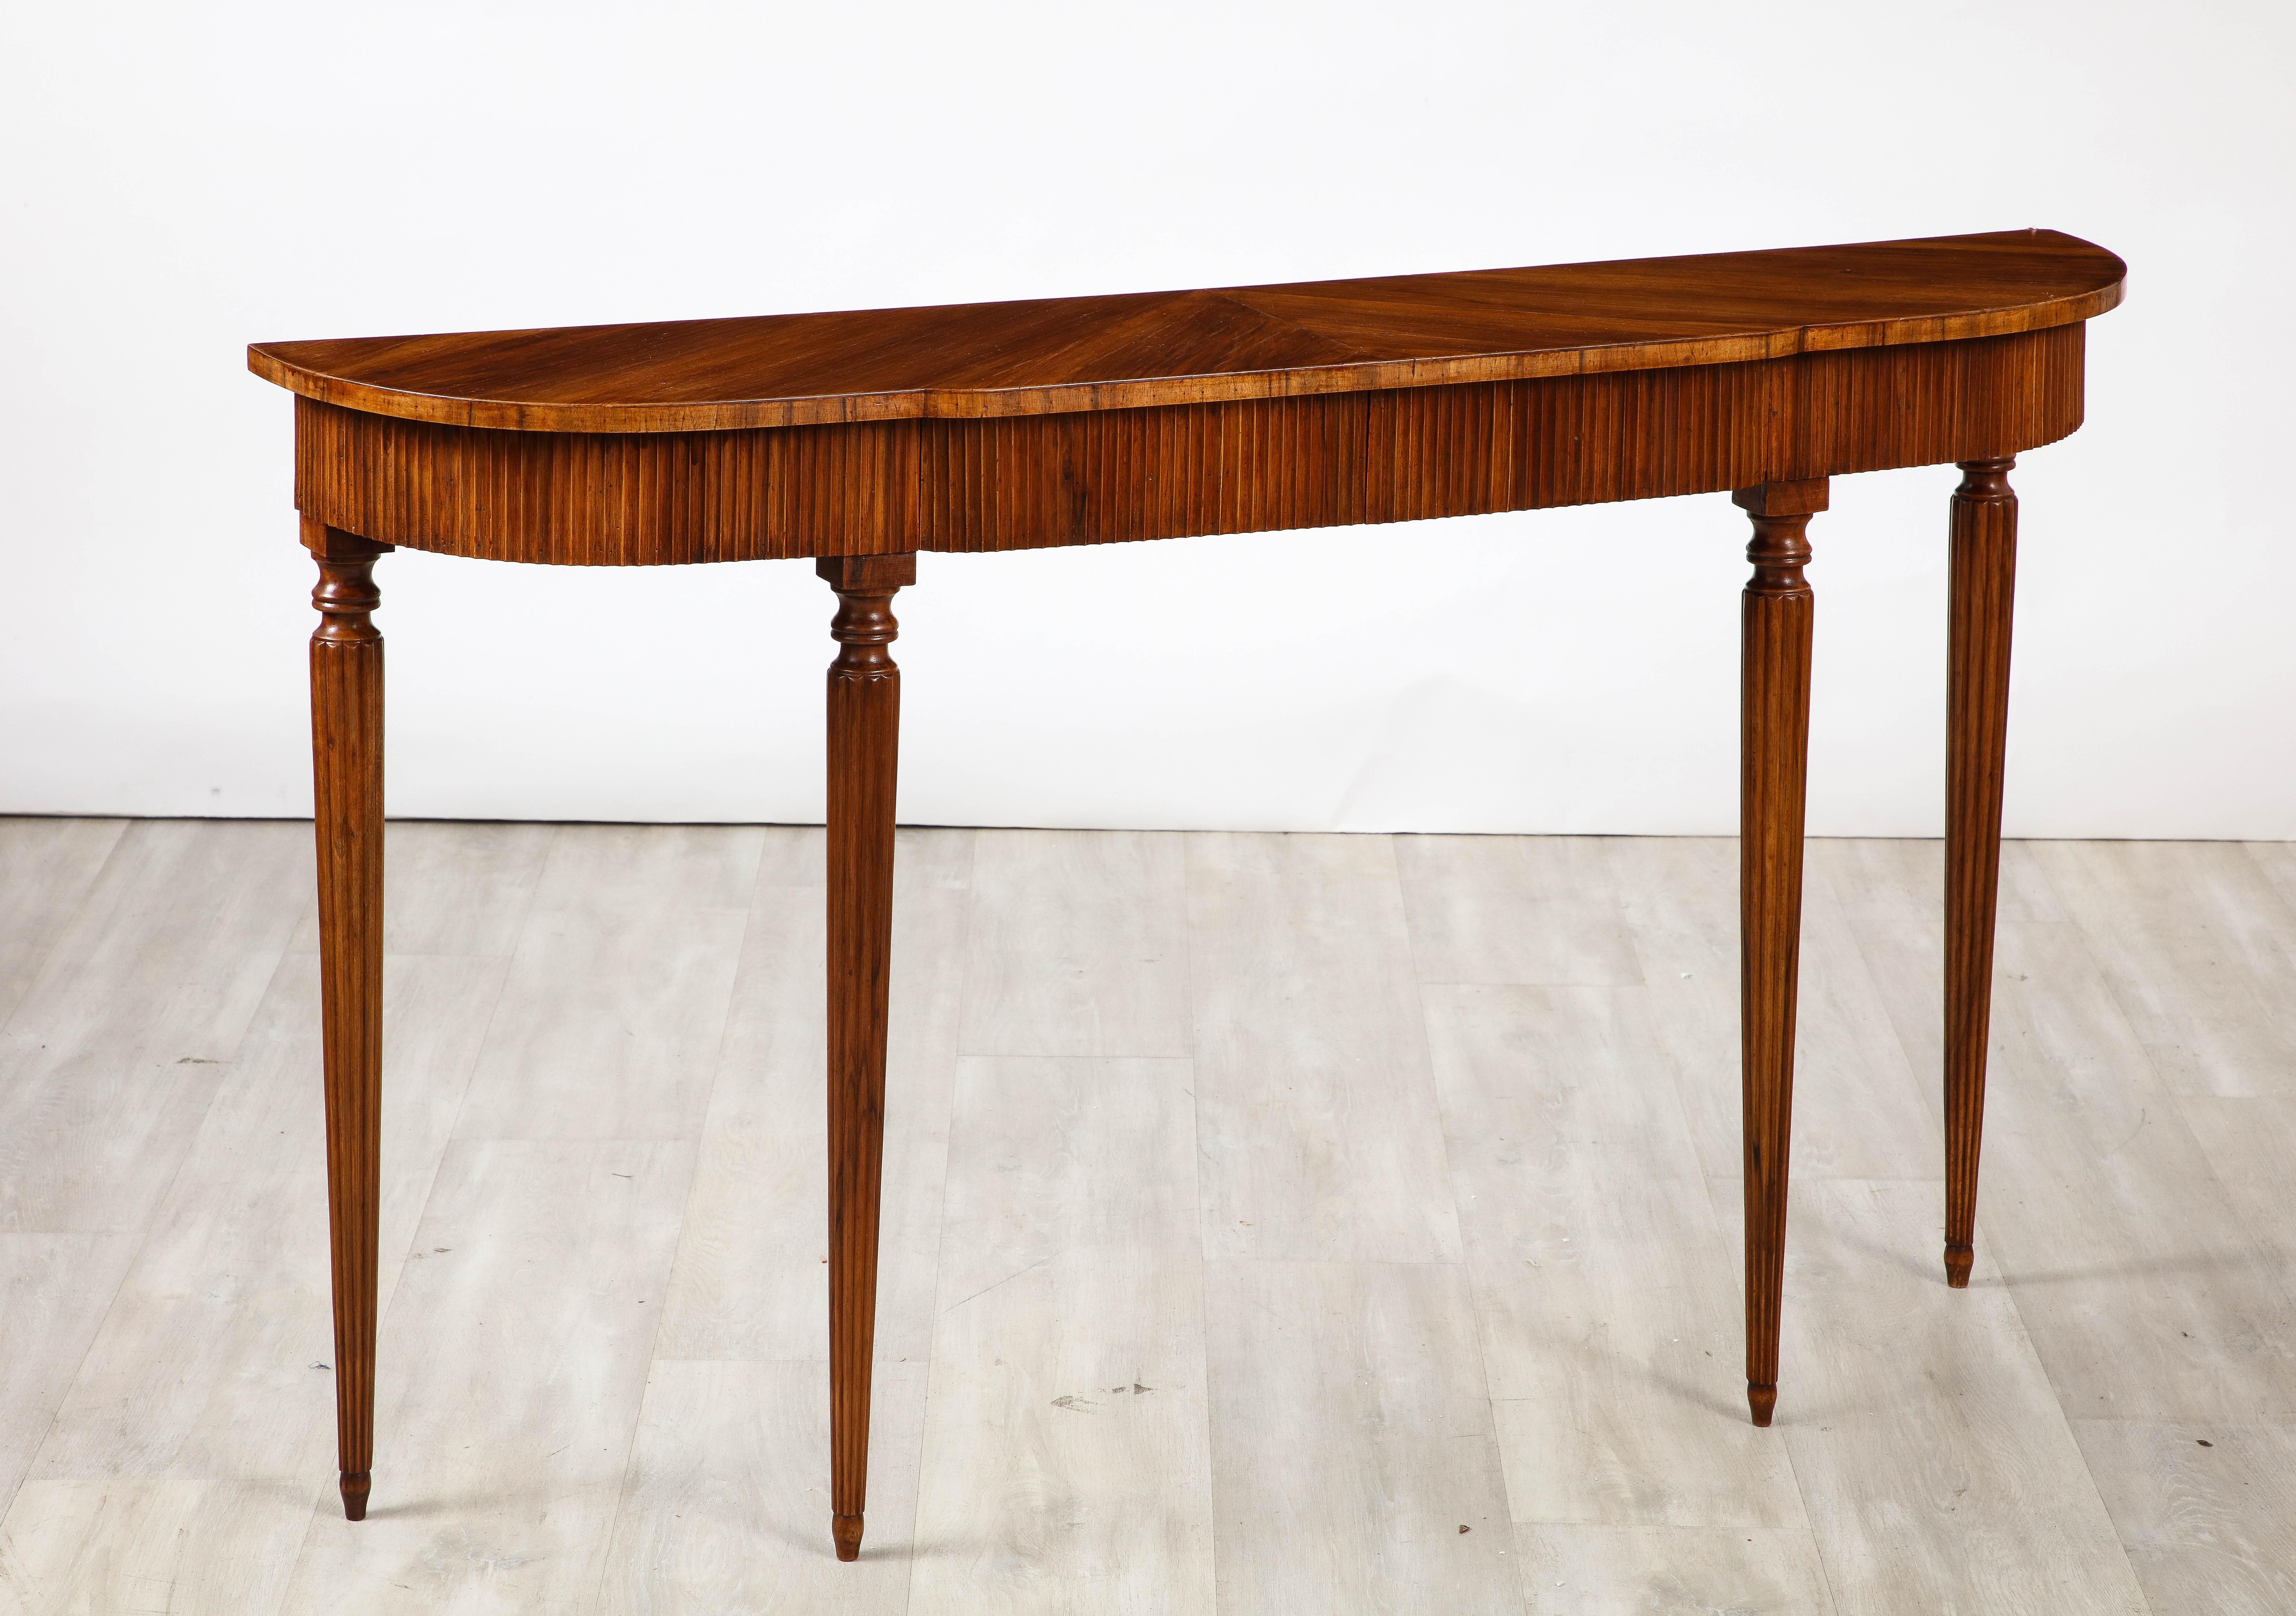 Italian Walnut Carved Console Table with Two Drawers, Italy circa 1930 For Sale 2